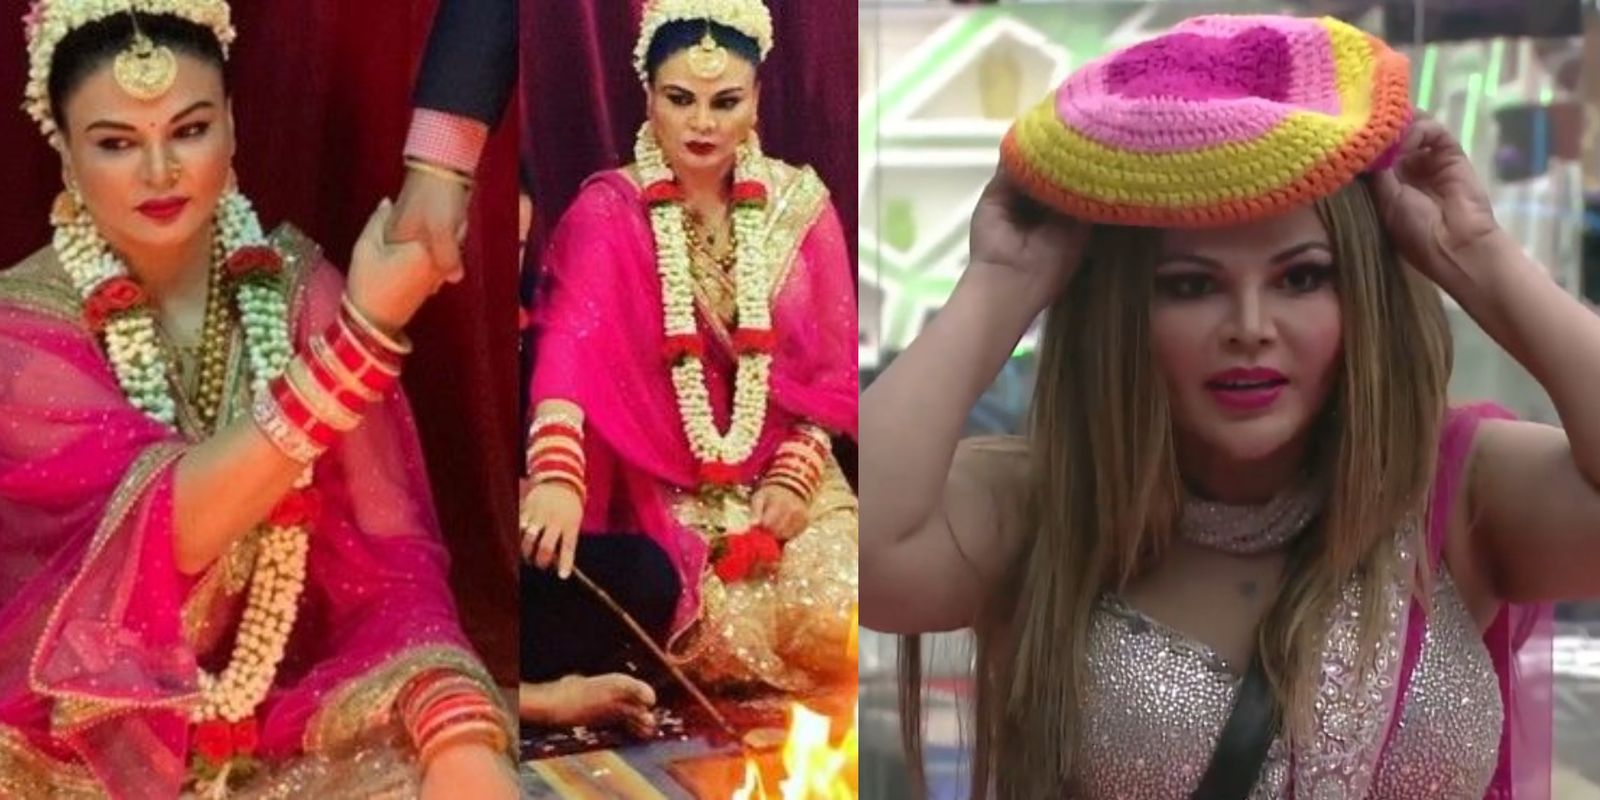 Bigg Boss 14: Rakhi Sawant’s Husband Ritesh To Enter As A Contestant; Says ‘I Want To Go As Her Support’